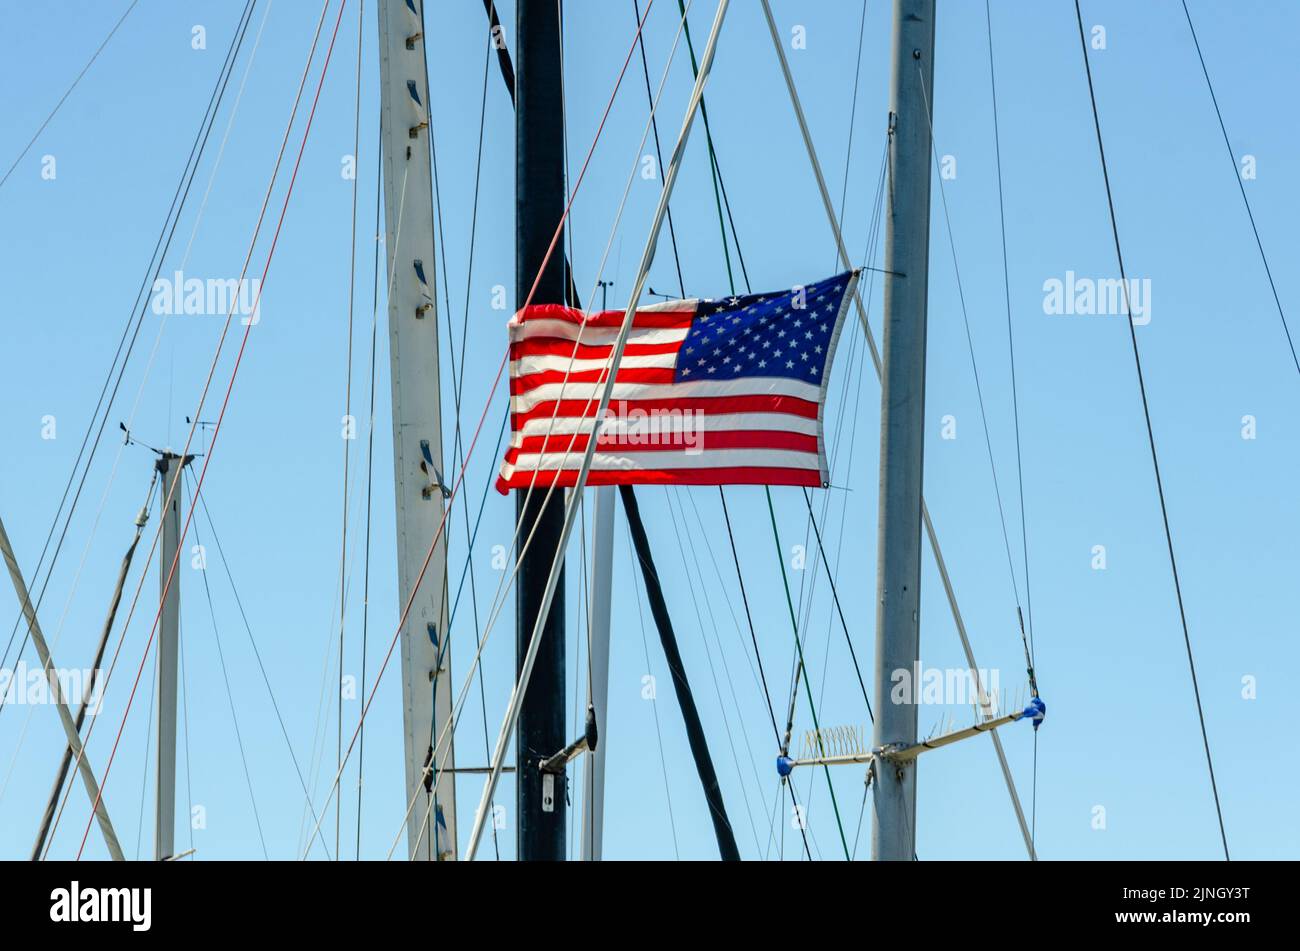 The Stars and Stripes, flag of The USA flying from rigging on a boat in Benicia Marin, California Stock Photo